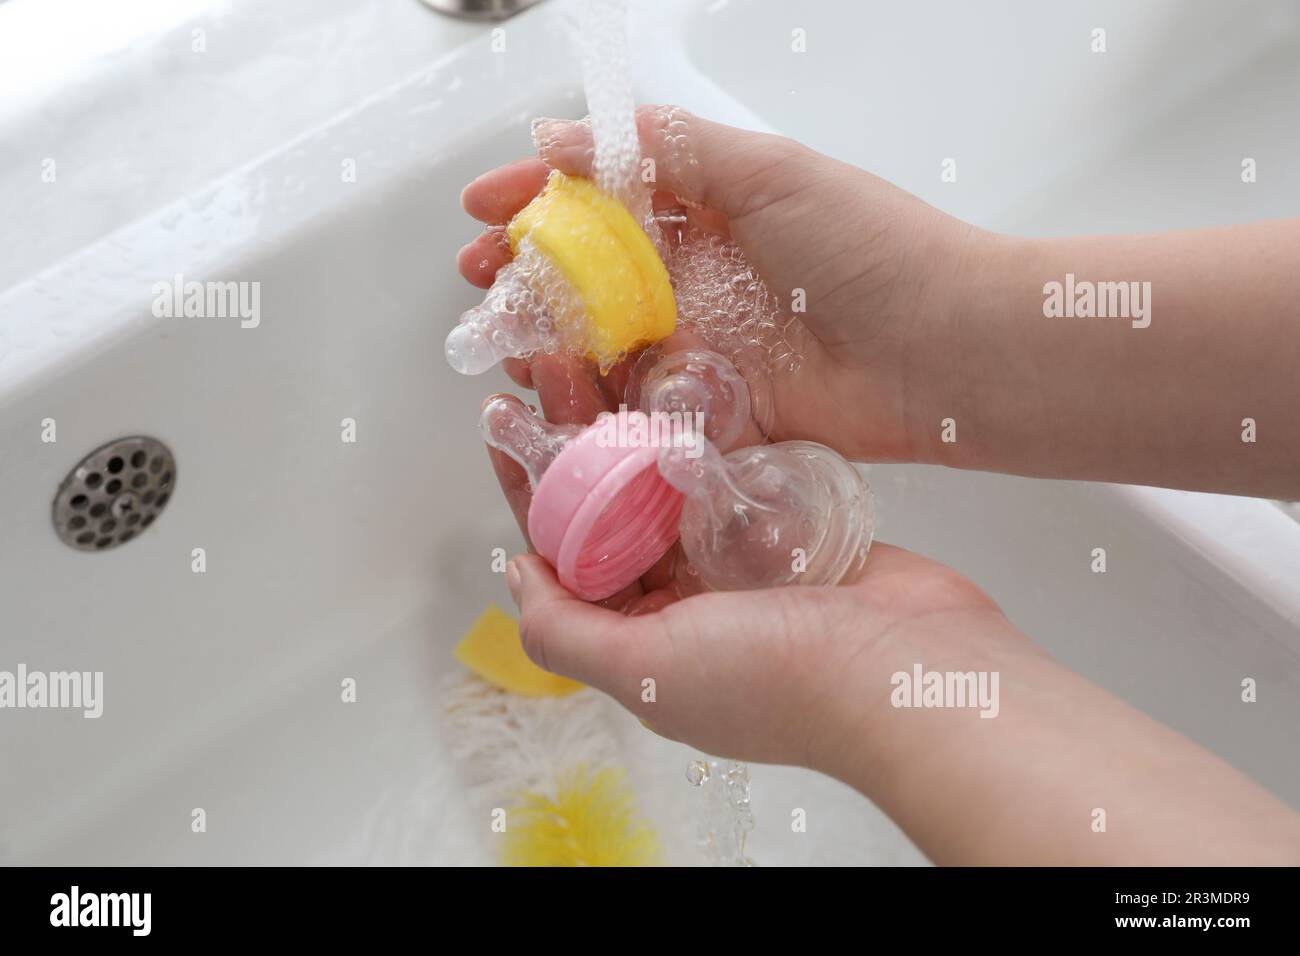 https://c8.alamy.com/comp/2R3MDR9/woman-washing-baby-bottle-nipples-under-stream-of-water-above-view-2R3MDR9.jpg